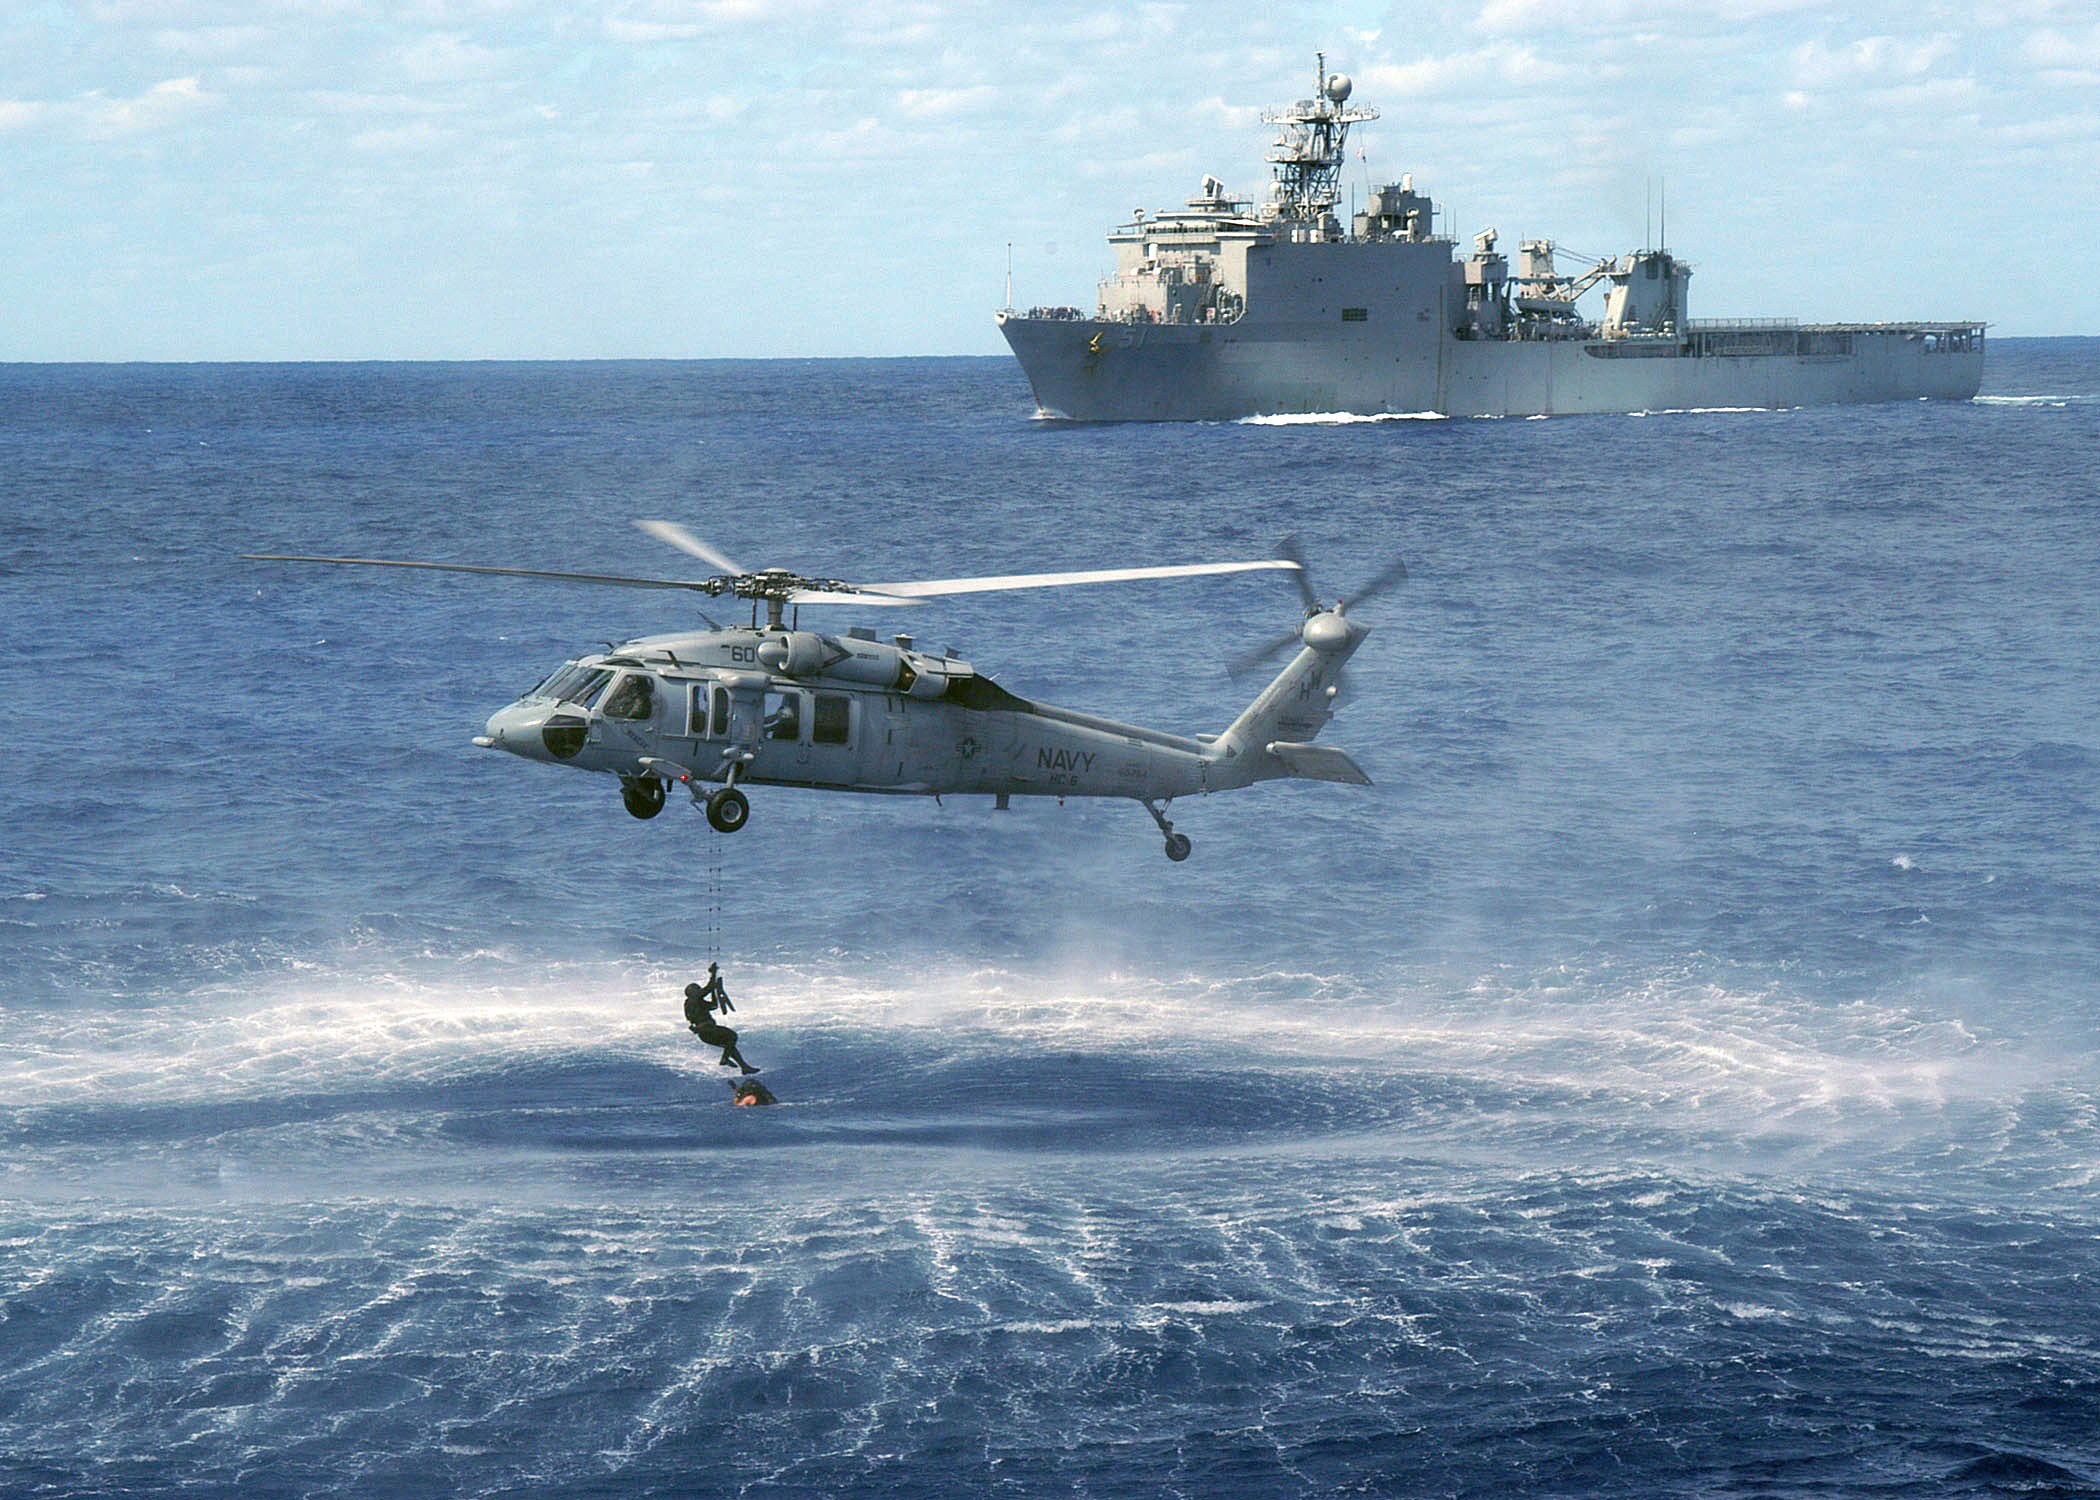 US_Navy_040613-N-2651J-007_An_MH-60S_Knight_Hawk_assigned_to_Helicopter_Combat_Support_Squadron_Six_(HC-6),_embarked_aboard_the_amphibious_assault_ship_USS_Saipan_(LHA_2).jpg